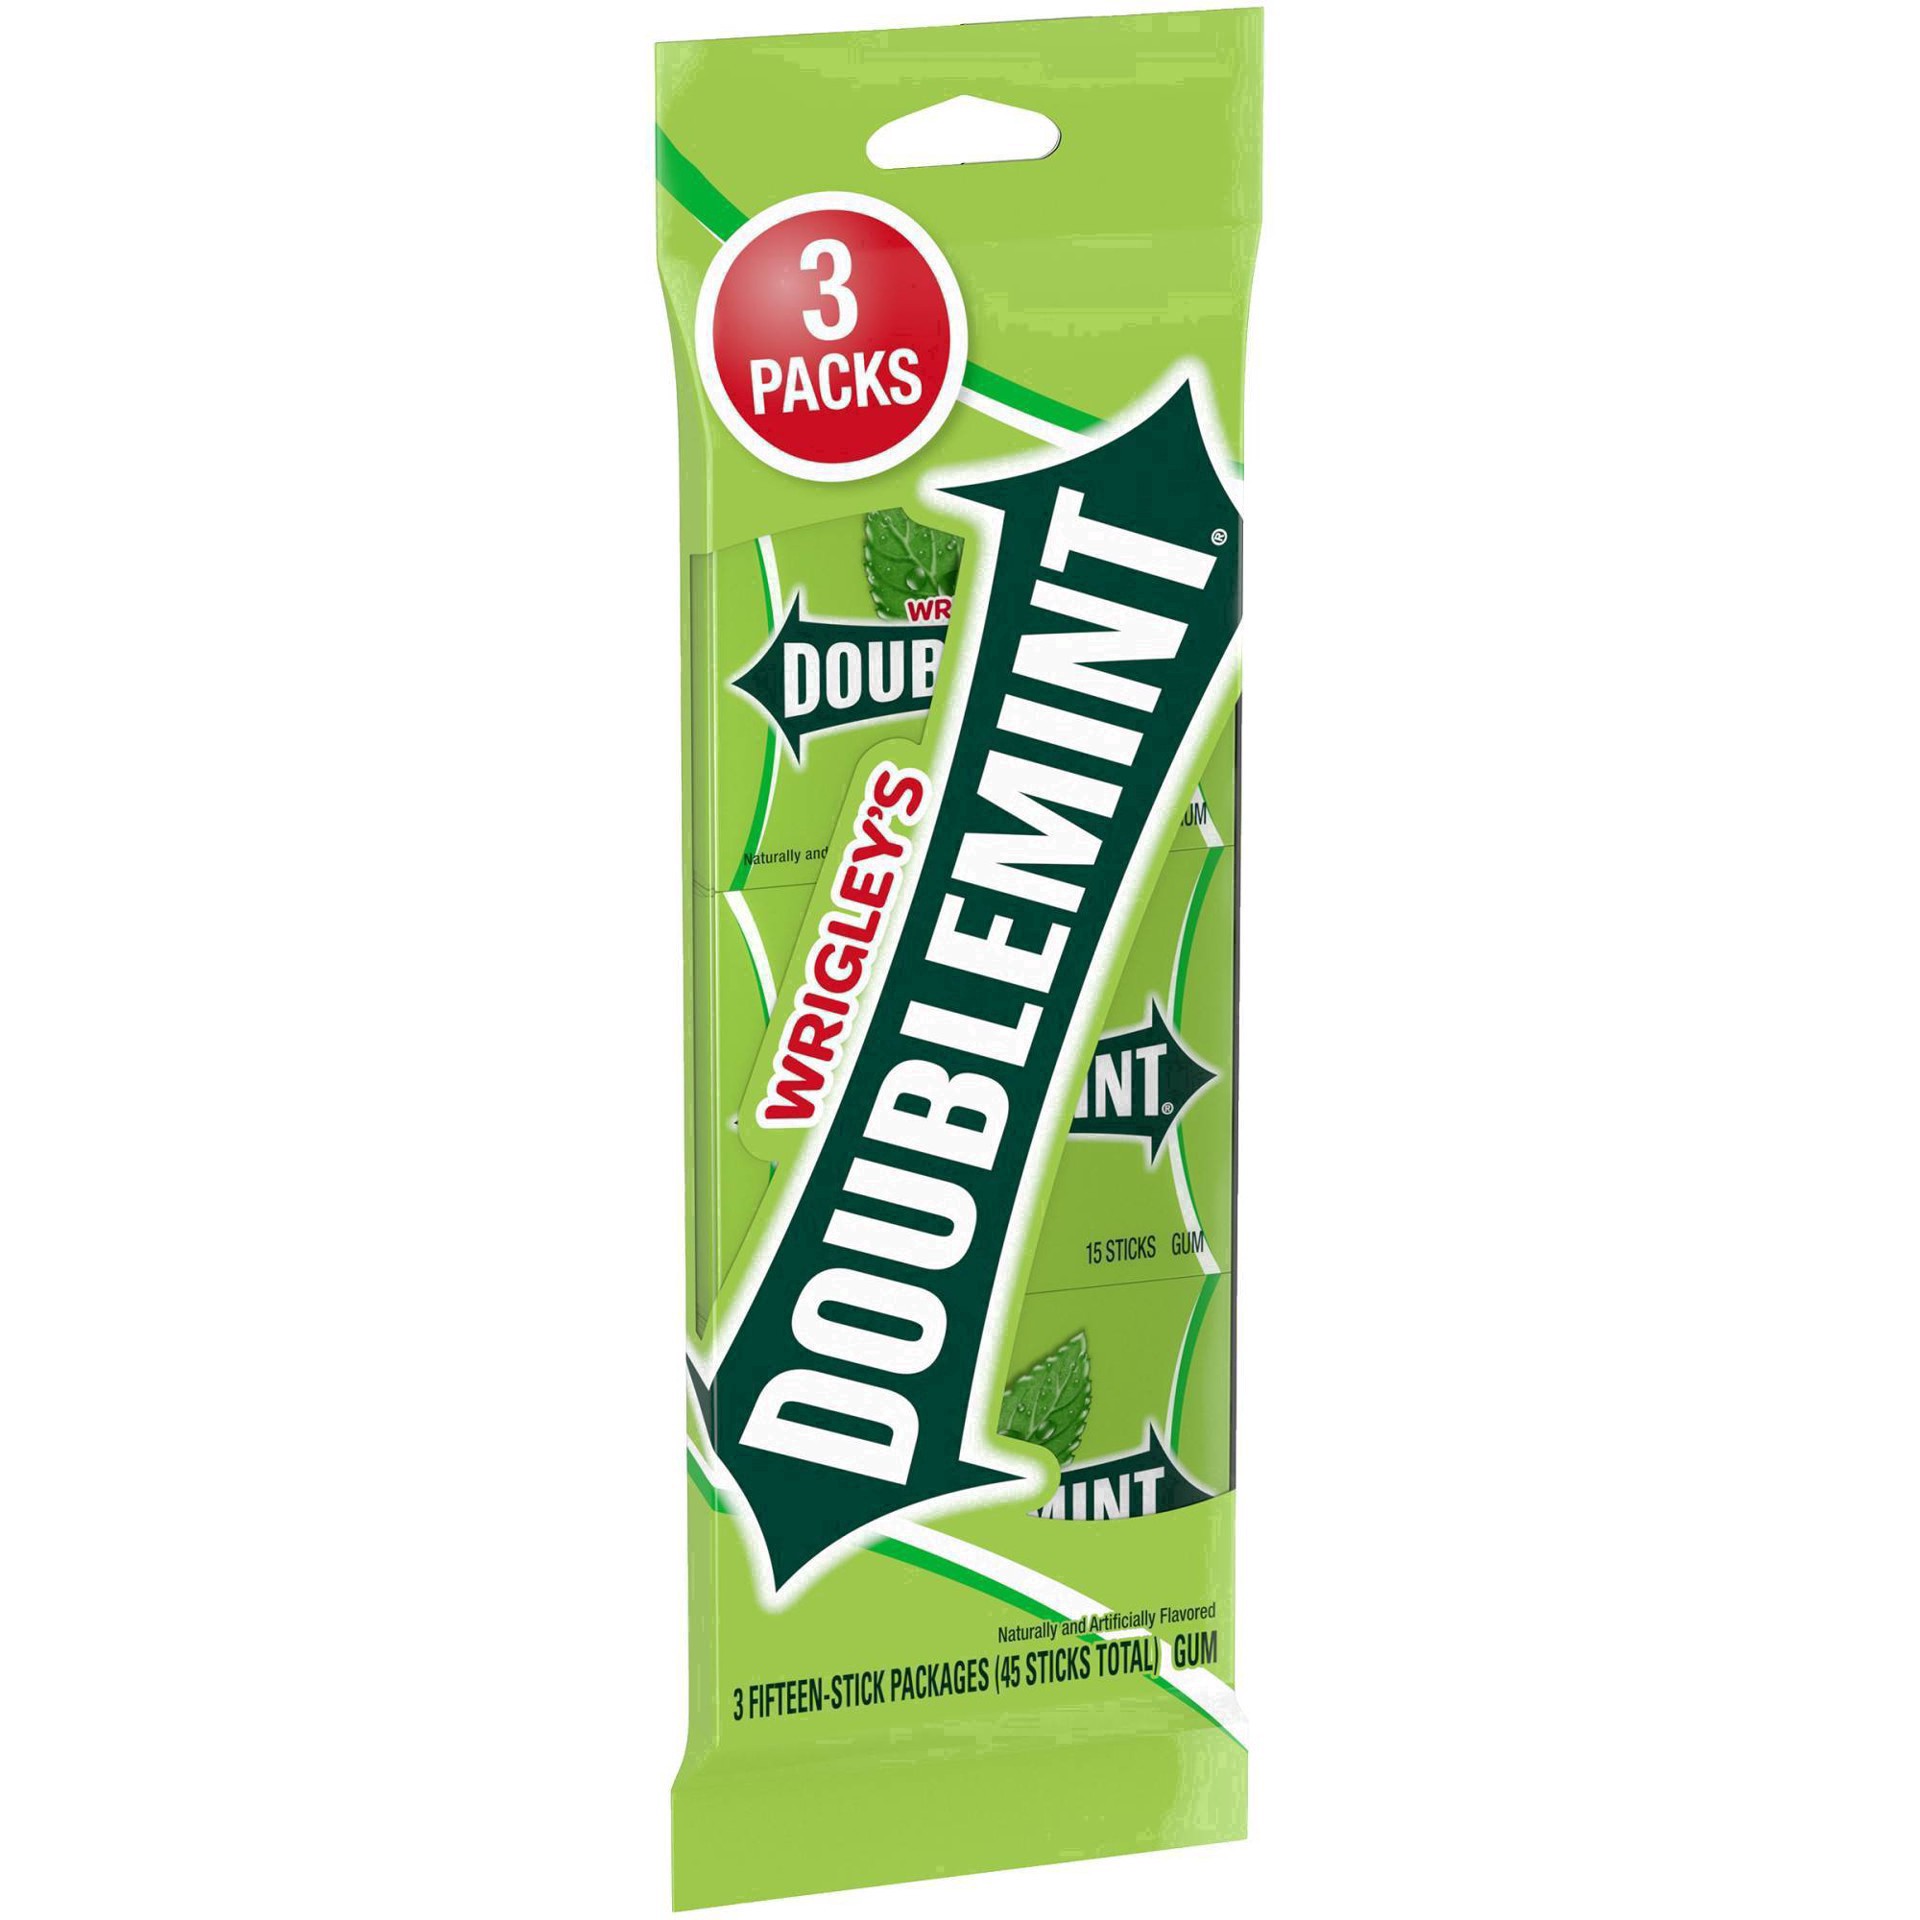 slide 100 of 134, Doublemint WRIGLEY'S DOUBLEMINT Bulk Chewing Gum, Value Pack, 15 ct (3 Pack), 45 ct